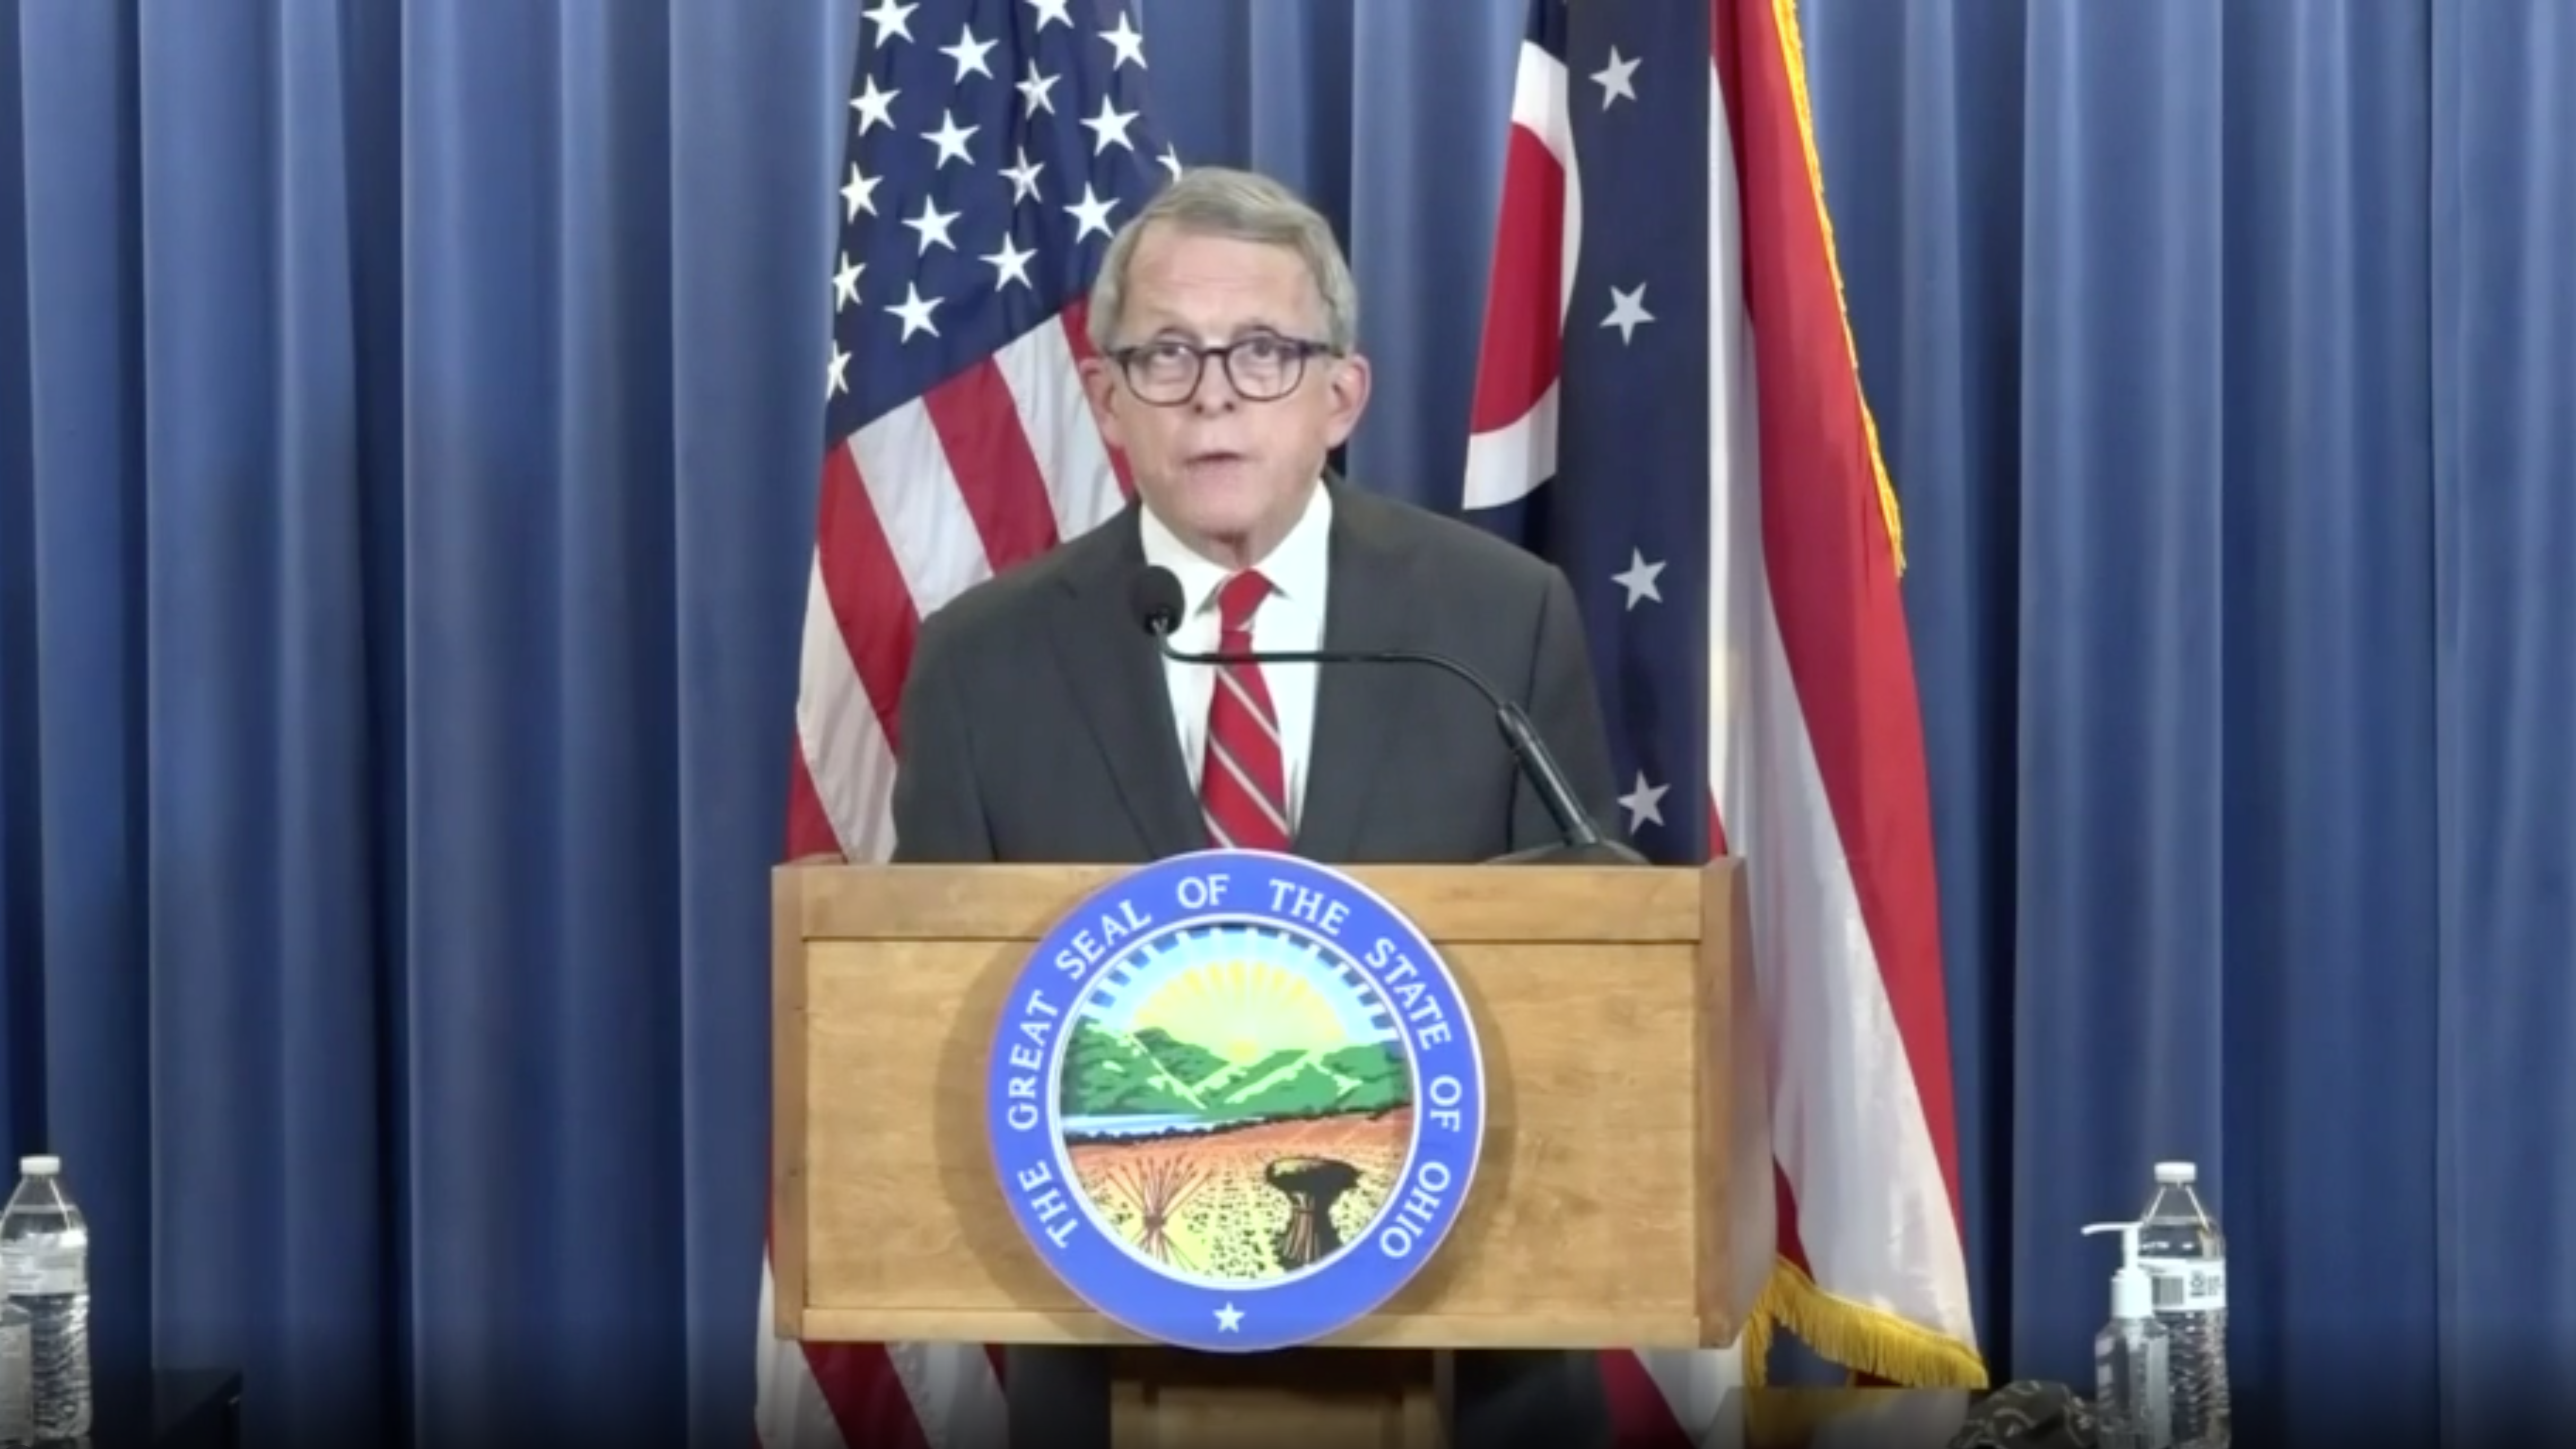 Ohio Gov. Mike DeWine speaks at a news conference in Columbus, Ohio on May, 30.